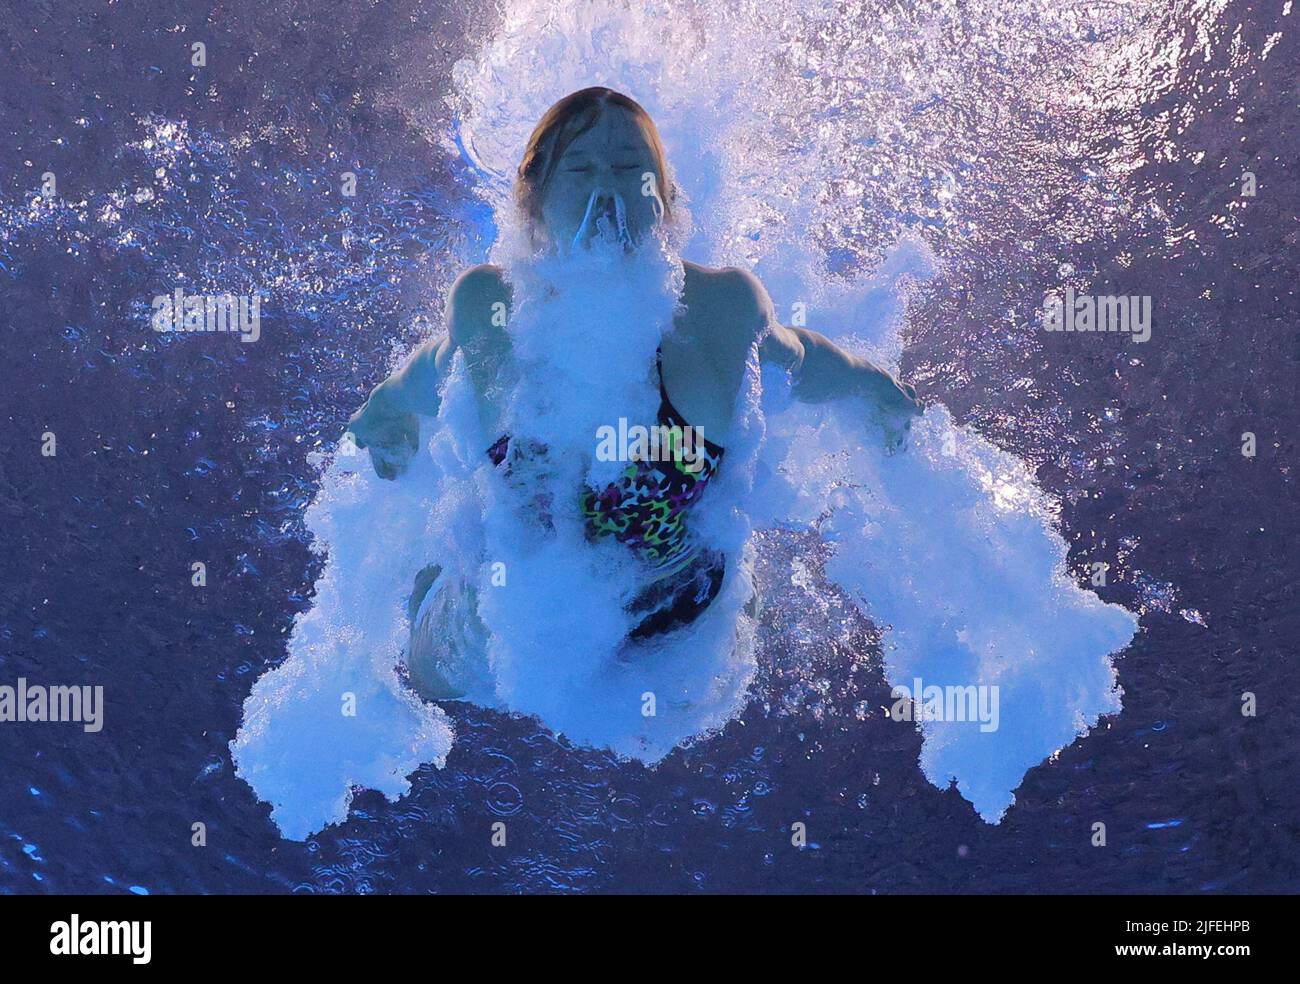 Diving - FINA World Championships - Duna Arena, Budapest, Hungary - July 2, 2022 Germany's Tina Punzel in action during the women's 3m springboard final REUTERS/Antonio Bronic Stock Photo